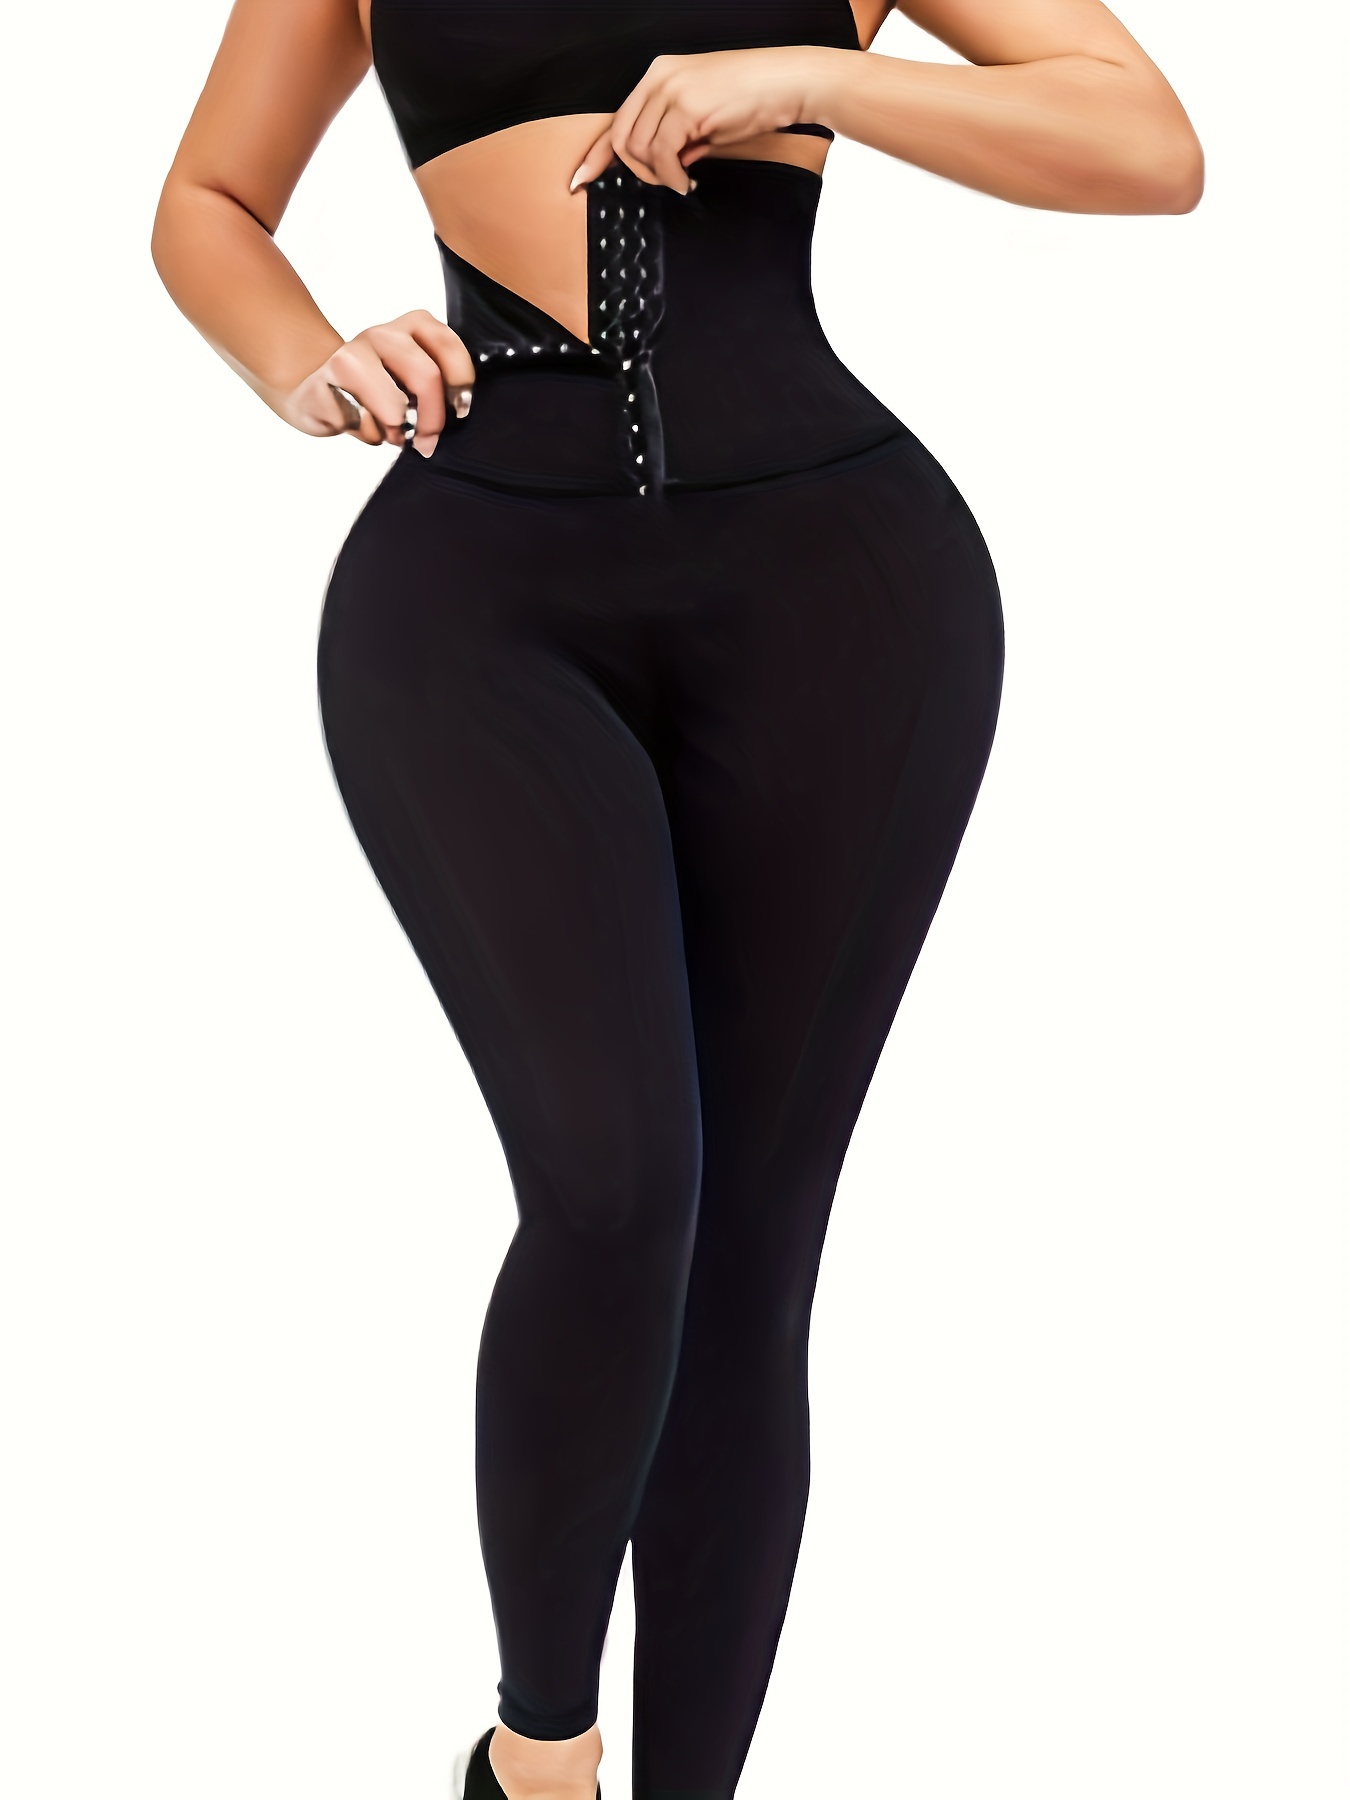 Women's High Waist Yoga Pants Skinny Slim Fit Hollow Back Tummy Control  Sweatpants Athletic Sports Workout Joggings Tights Black at  Women's  Clothing store